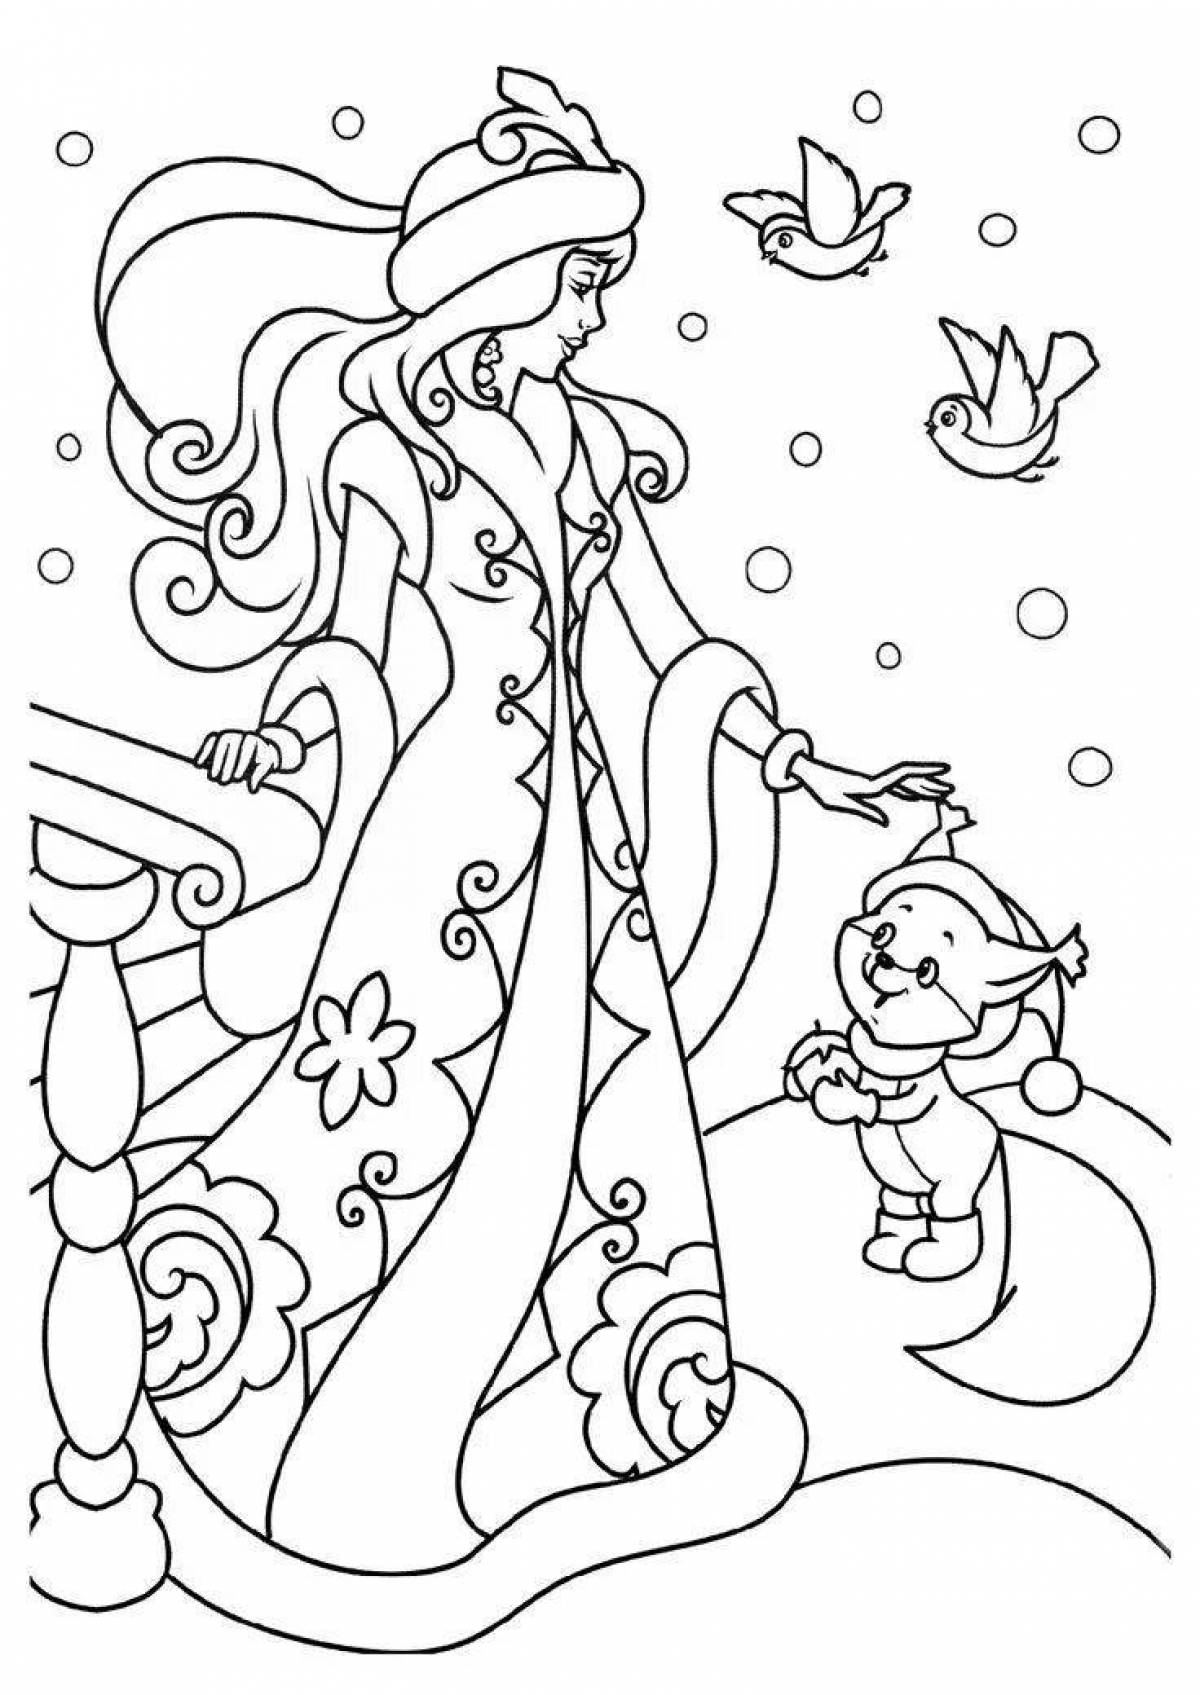 Awesome winter coloring pages for girls